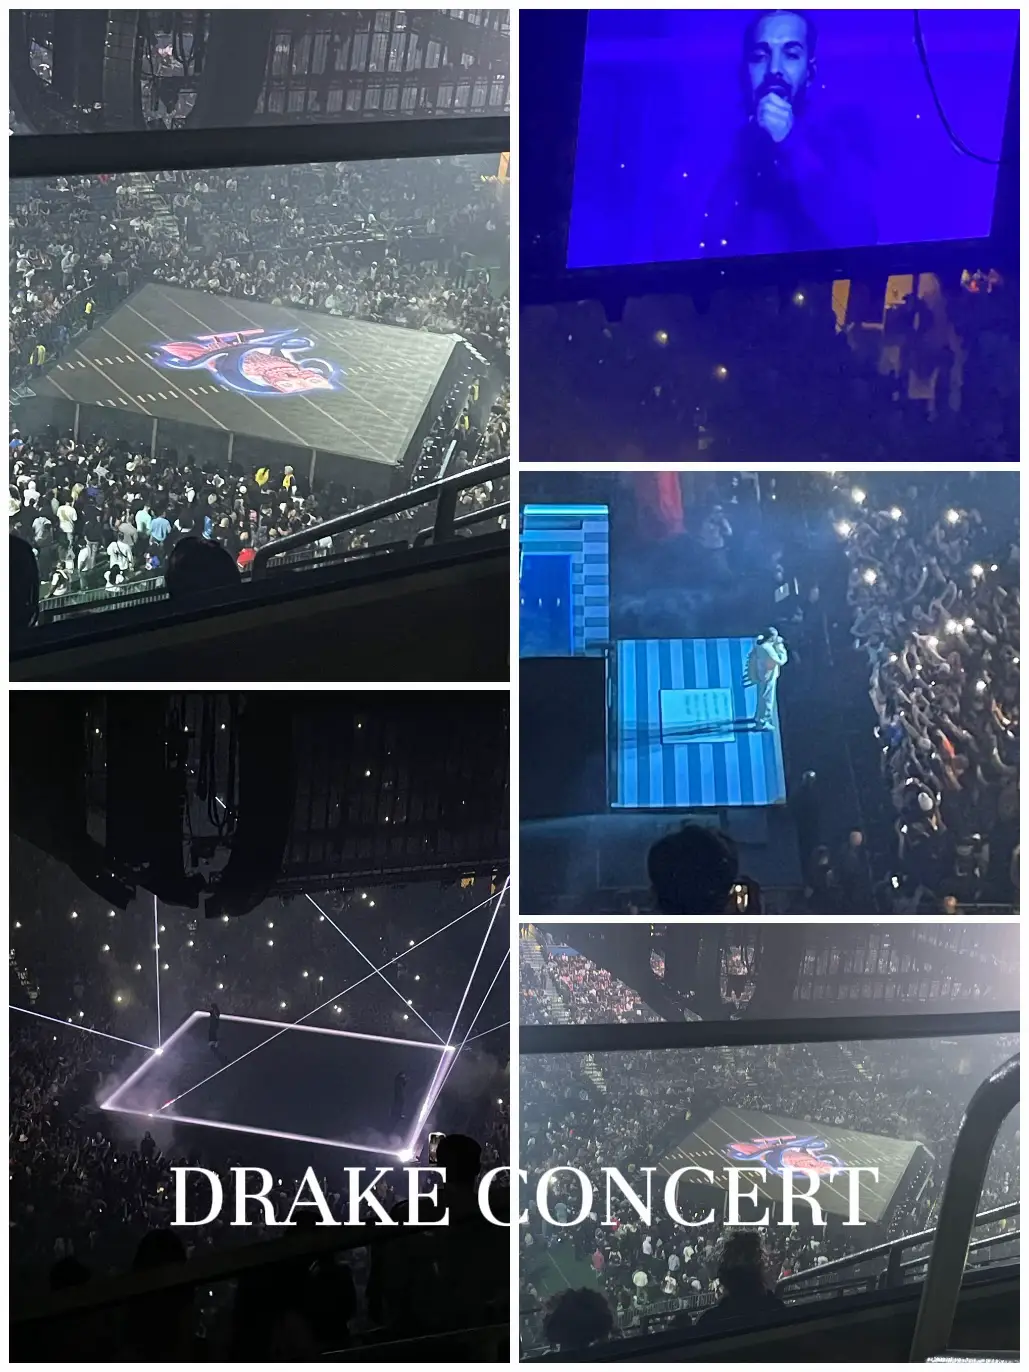 DRAKE CONCERT, Gallery posted by Michelle Oraha